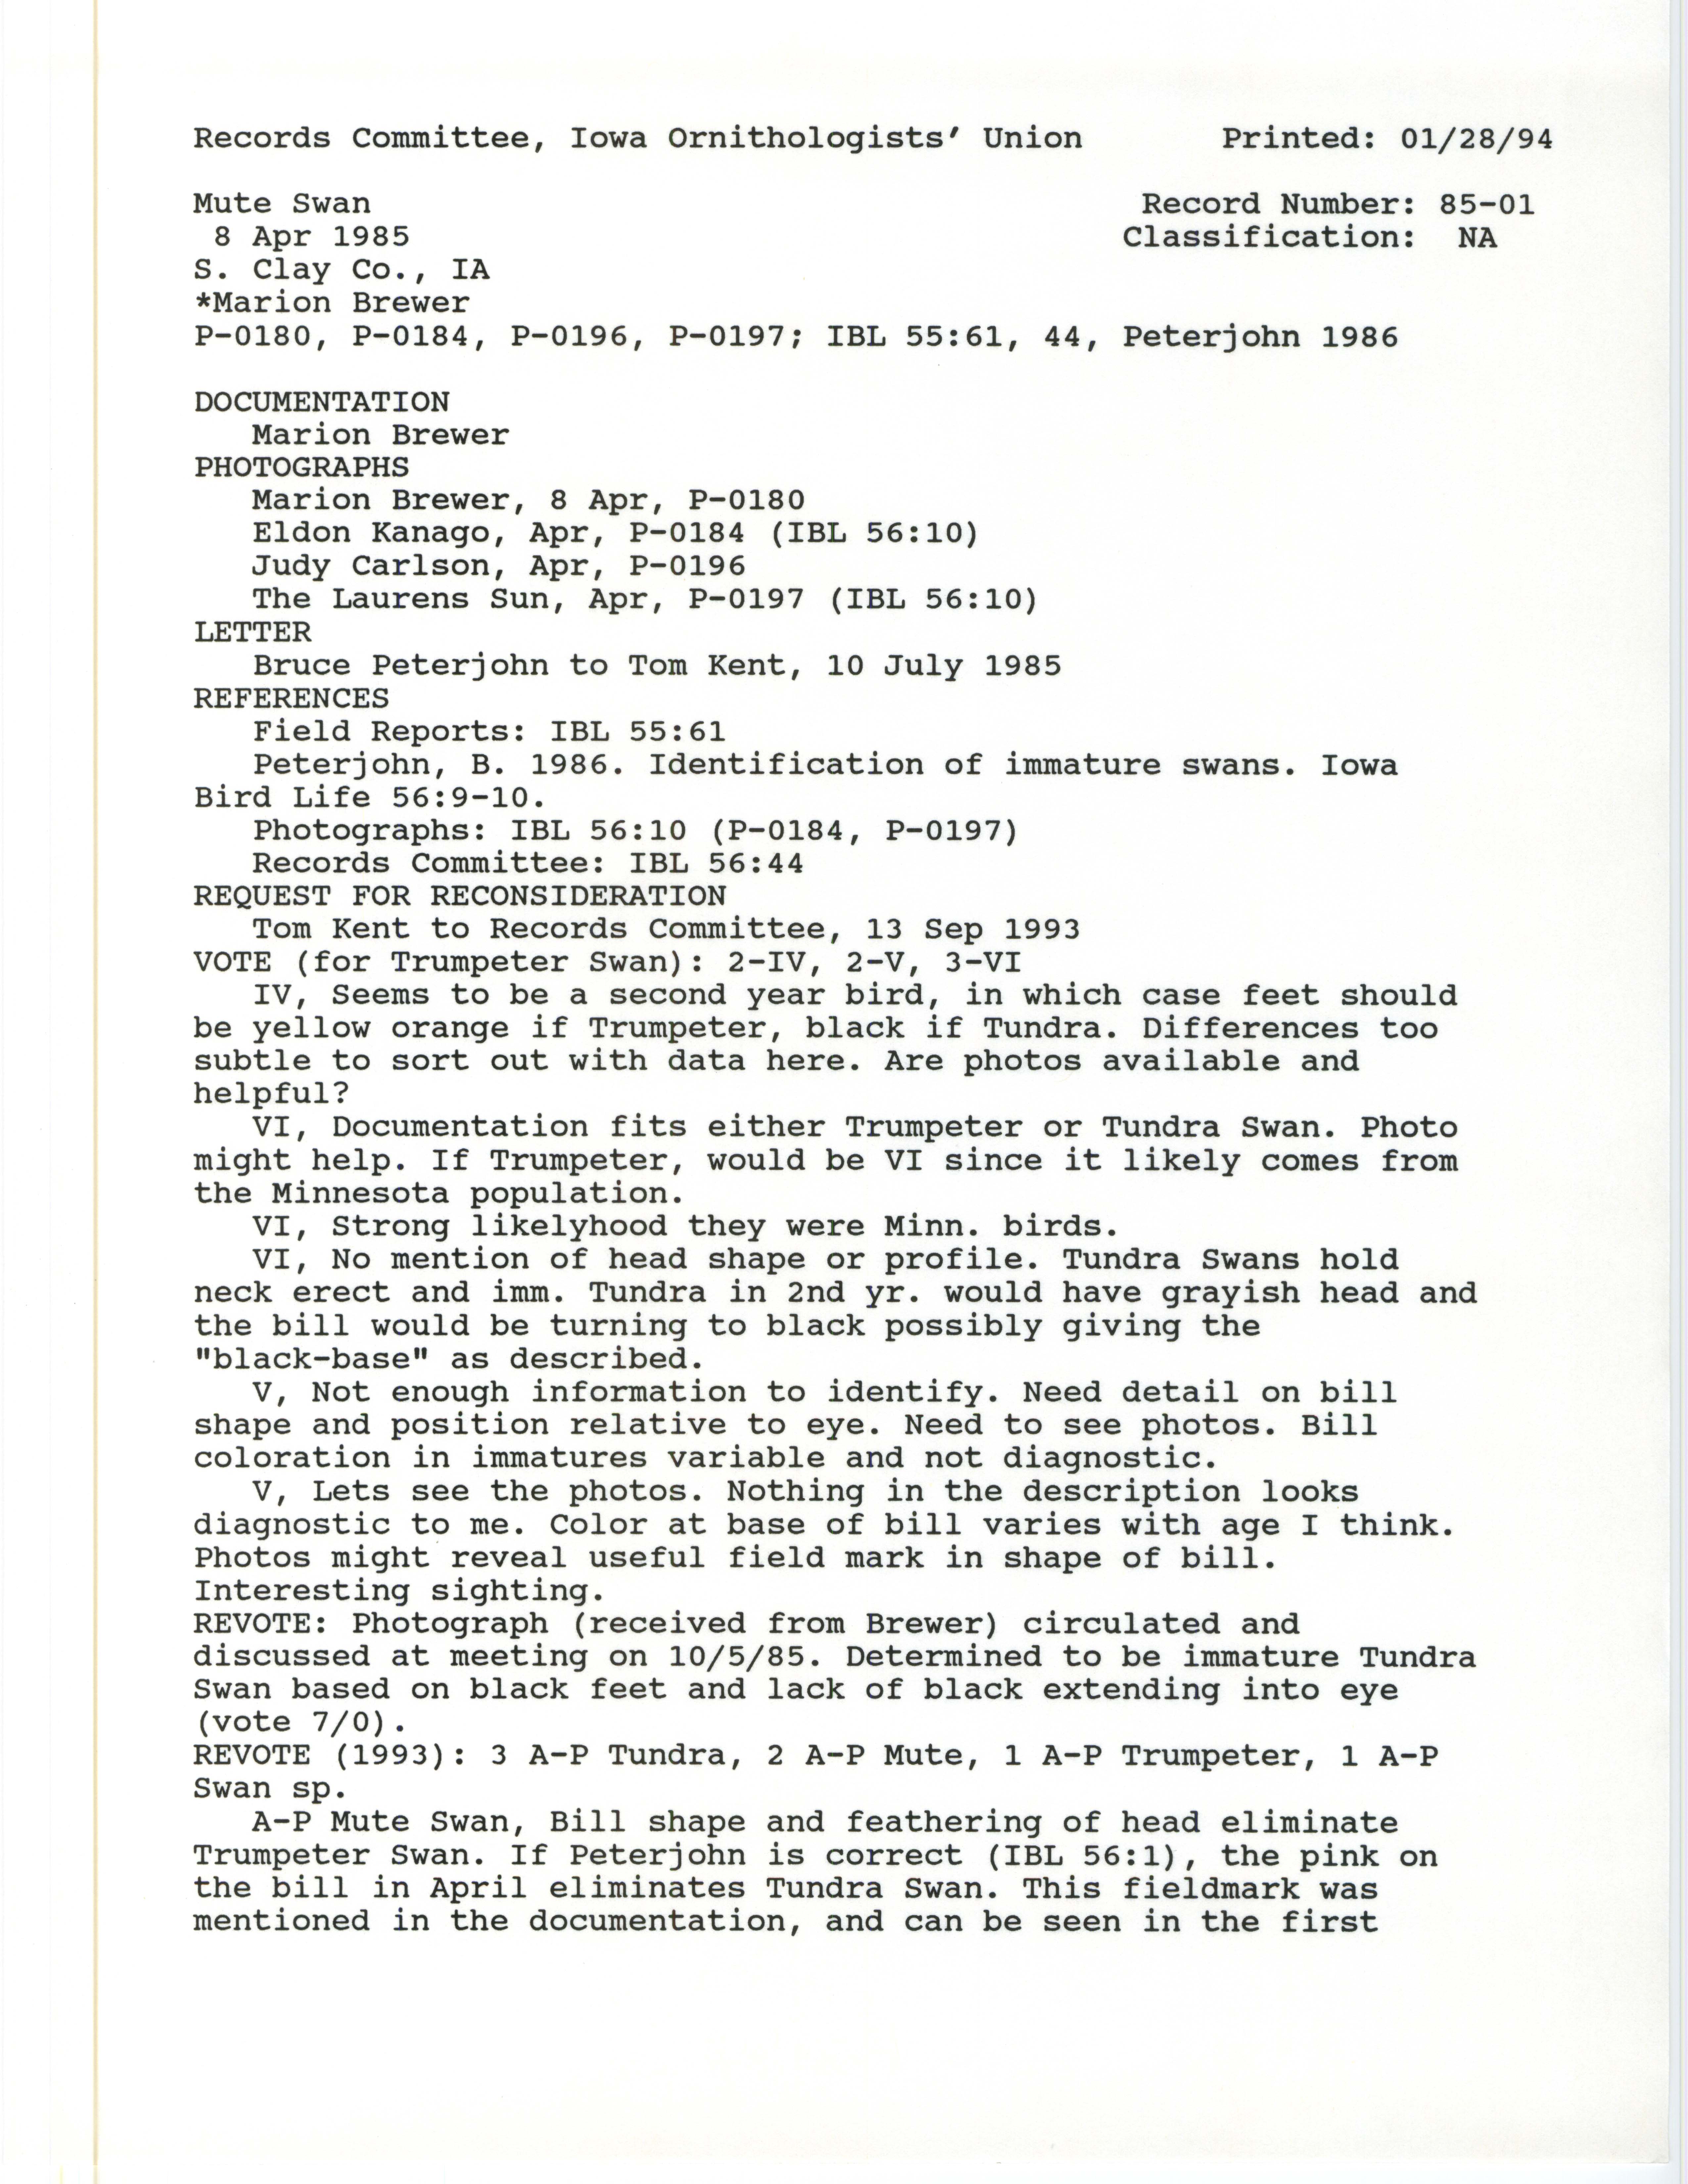 Records Committee review for rare bird sighting of Mute Swan at South Clay County, 1985